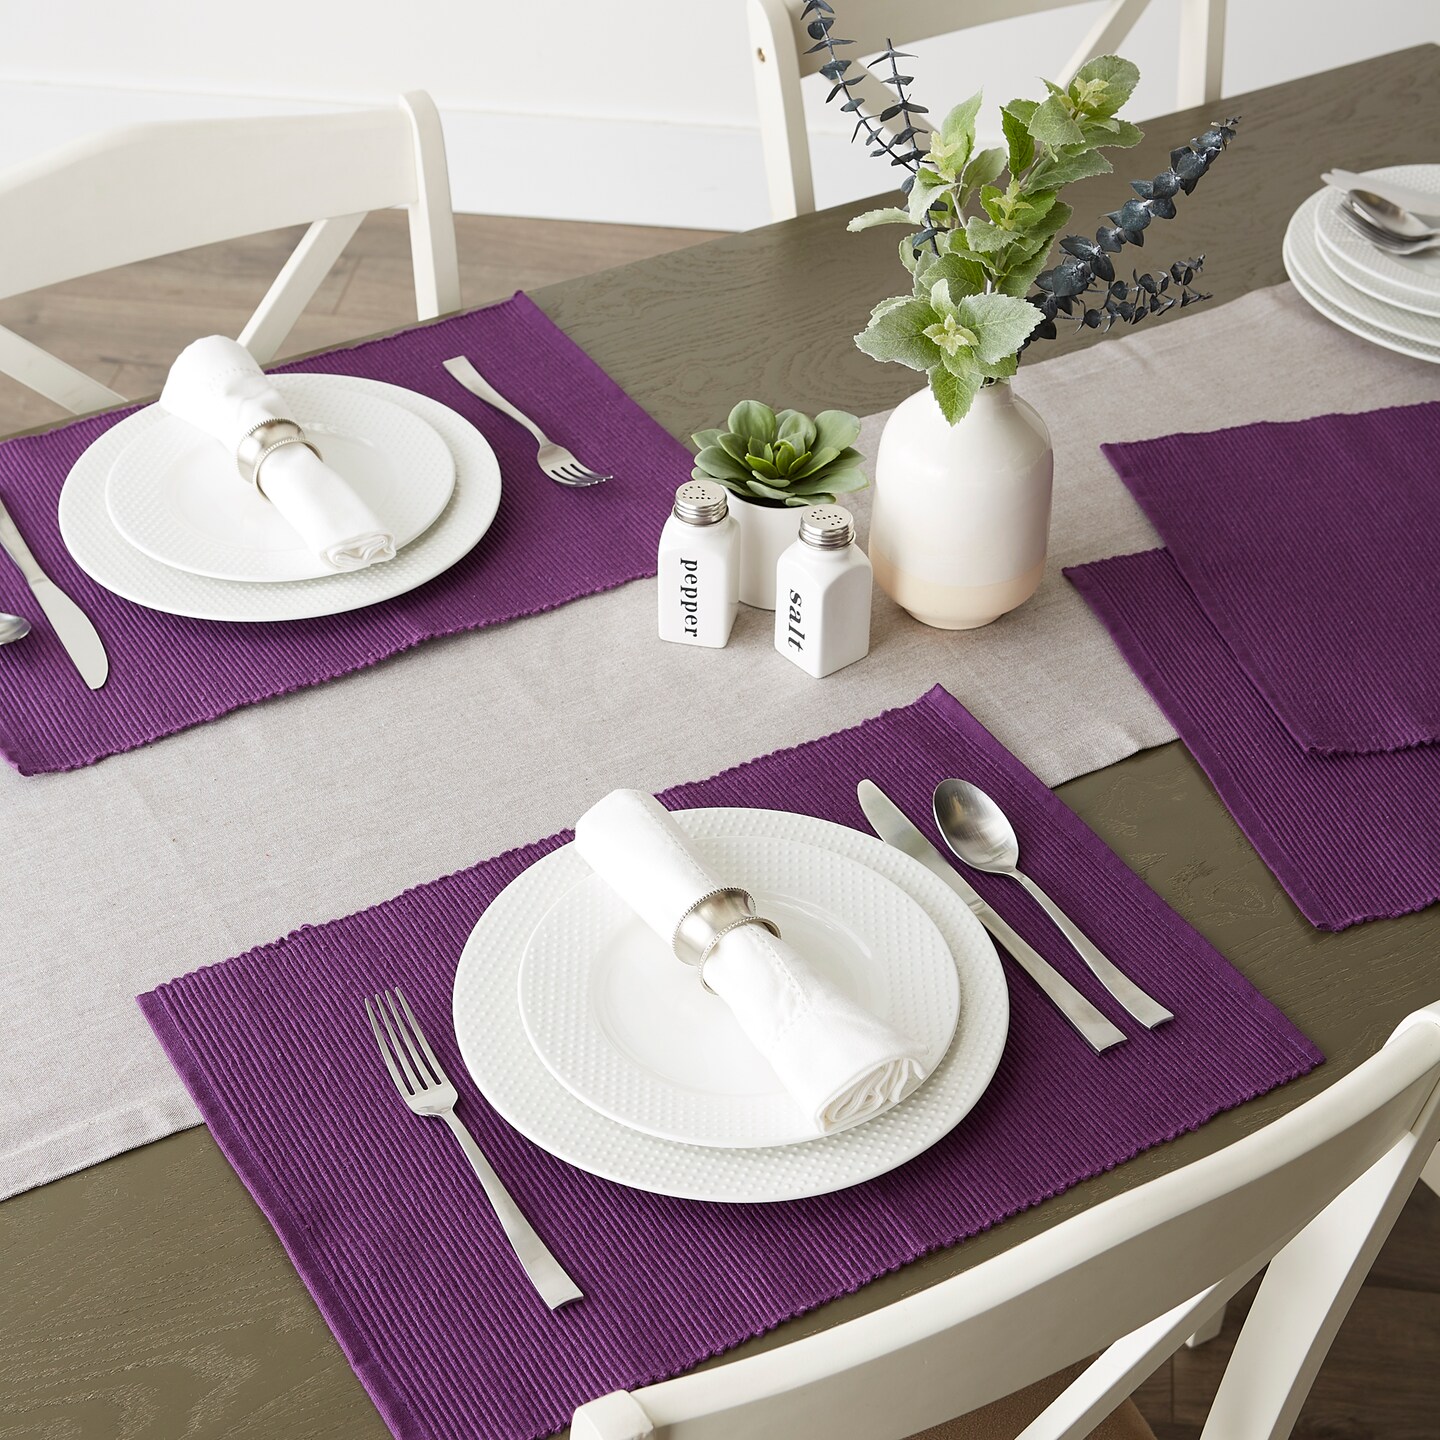 DII Eggplant Ribbed Placemat (Set of 6)